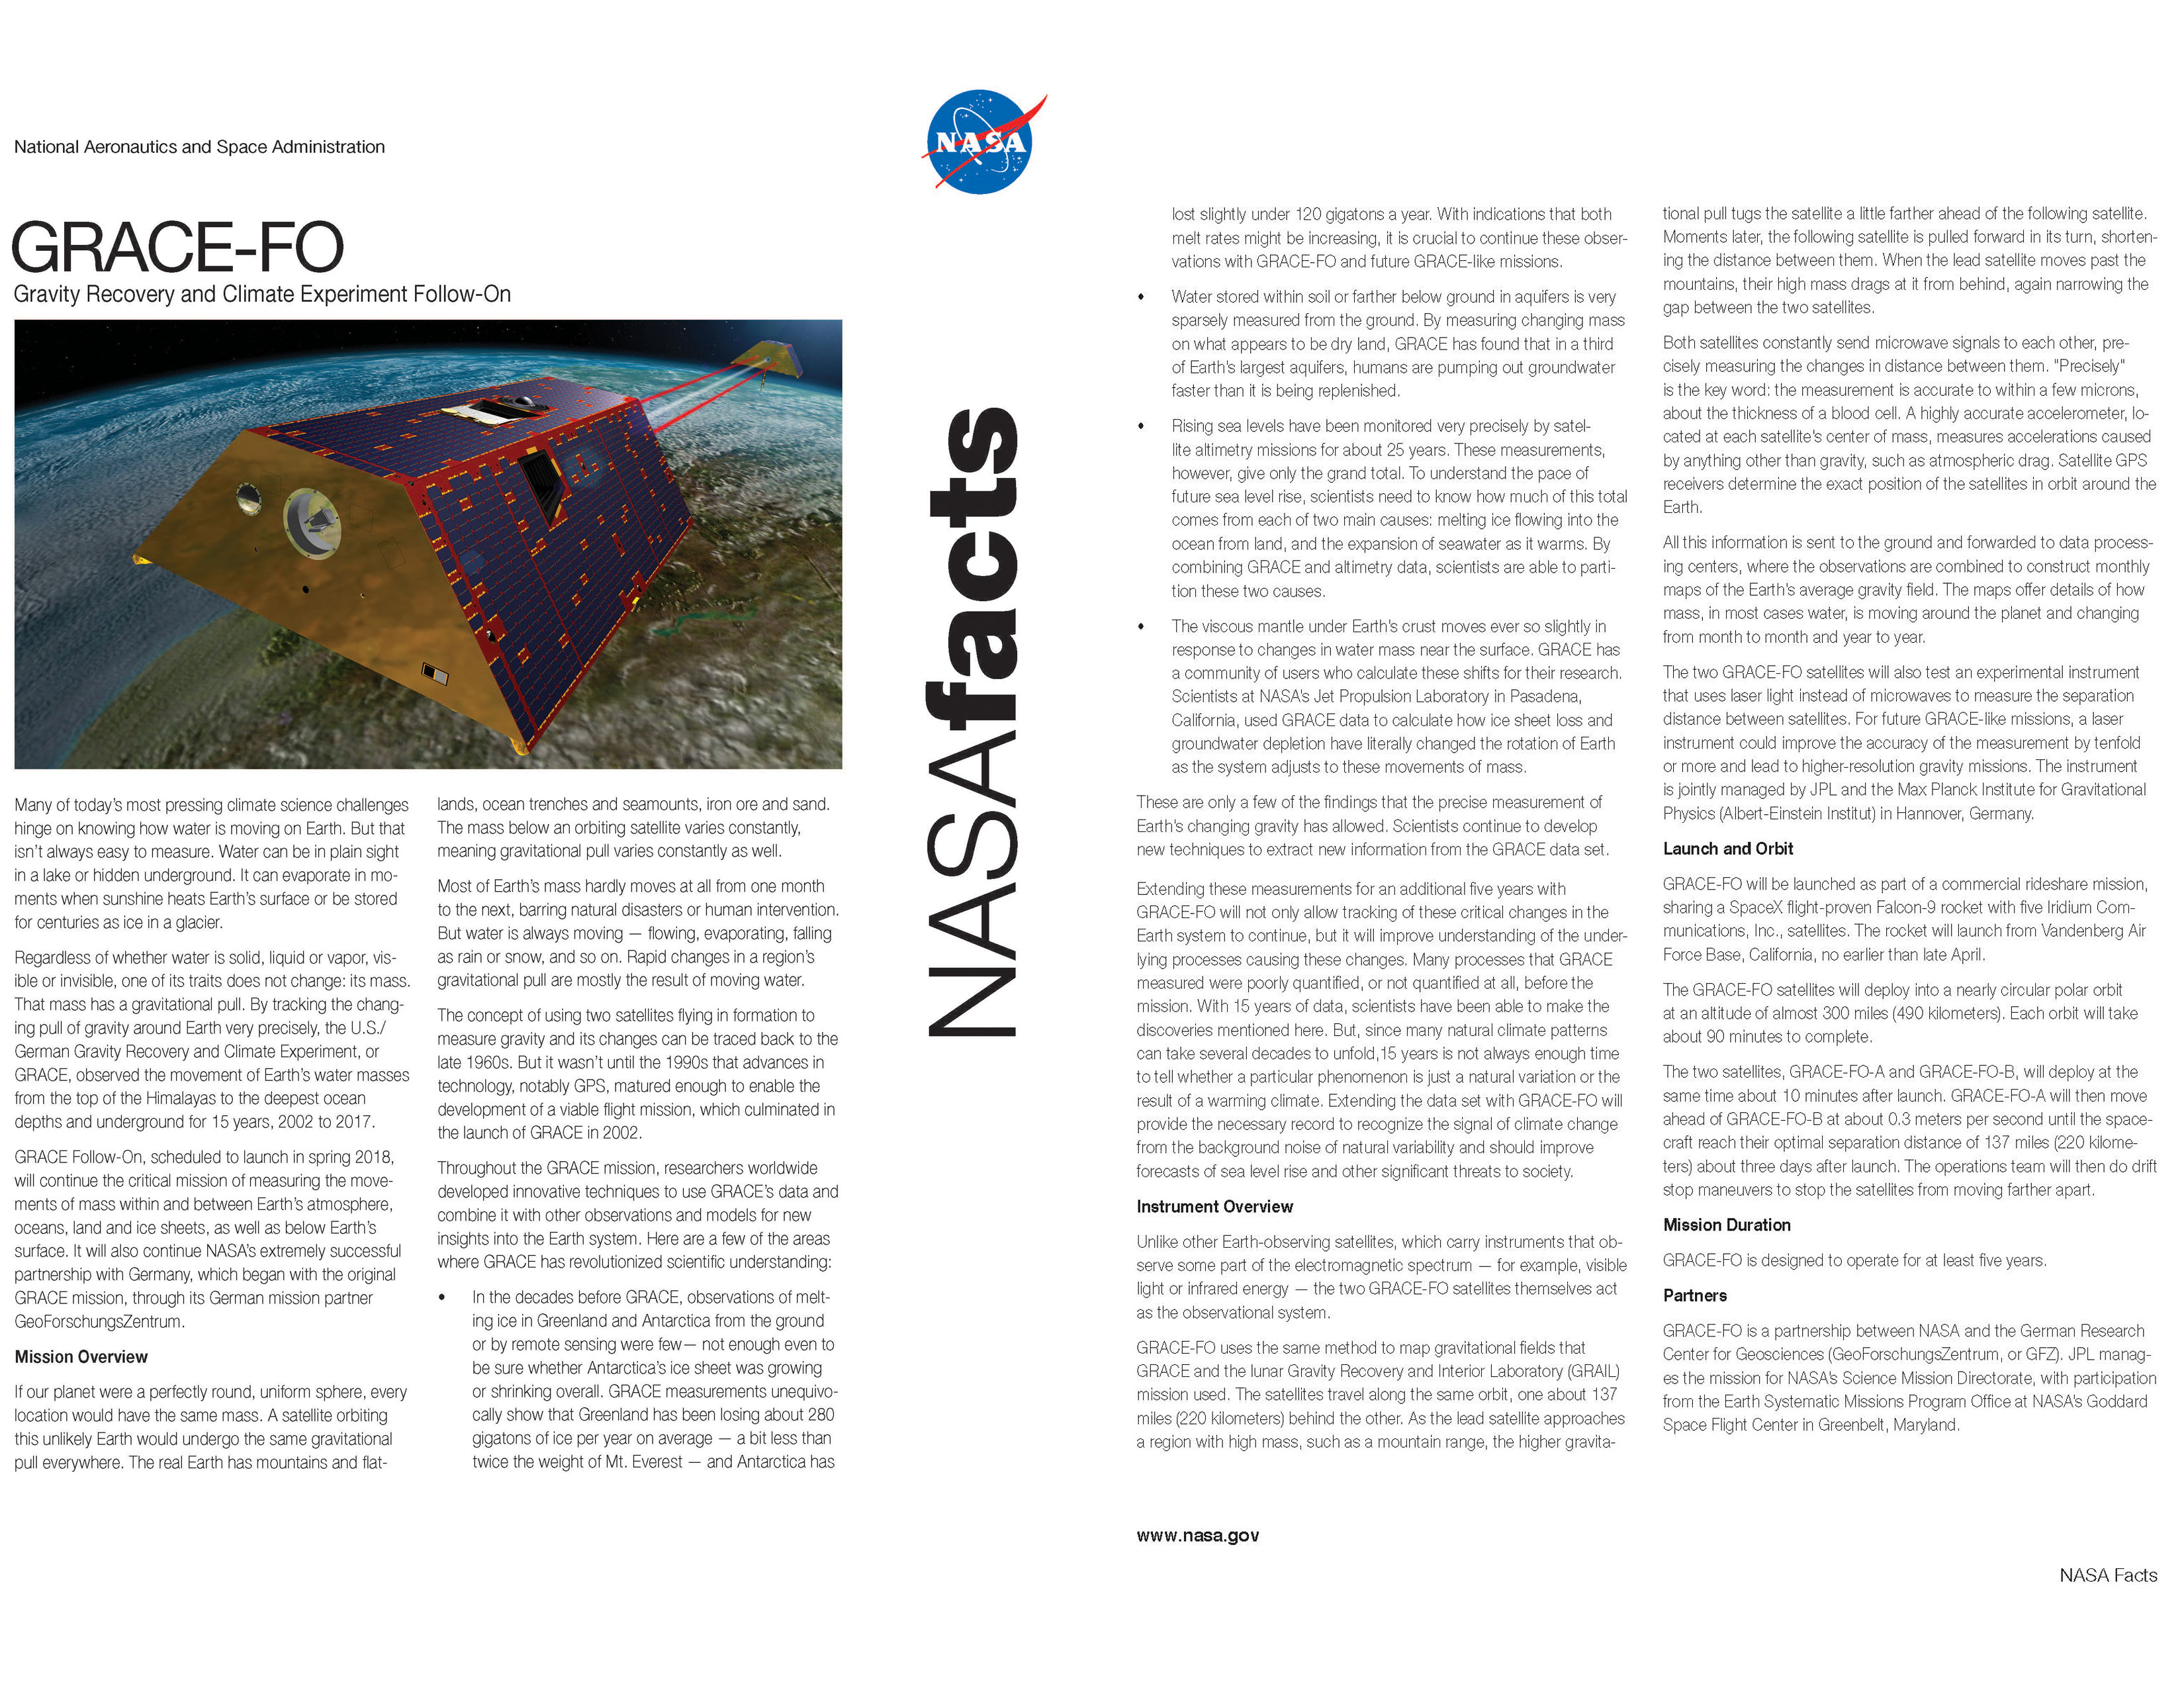 GRACE Follow-On, scheduled to launch in spring 2018, will continue the critical mission of measuring the movements of mass within and between Earth’s atmosphere, oceans, land and ice sheets, as well as below Earth’s surface.